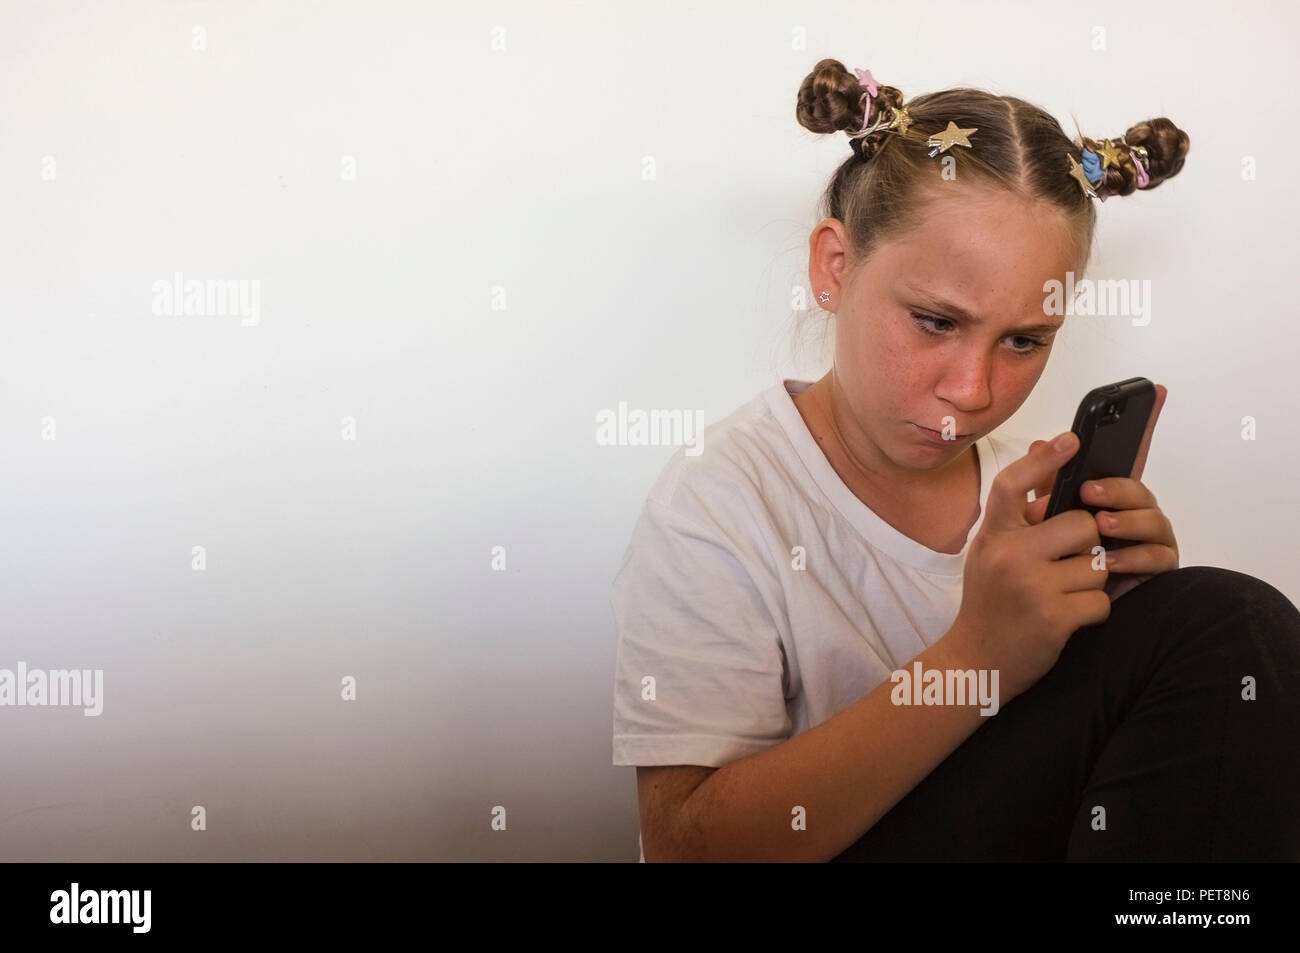 Pre-teen girl interacting with a mobile phone. Stock Photo